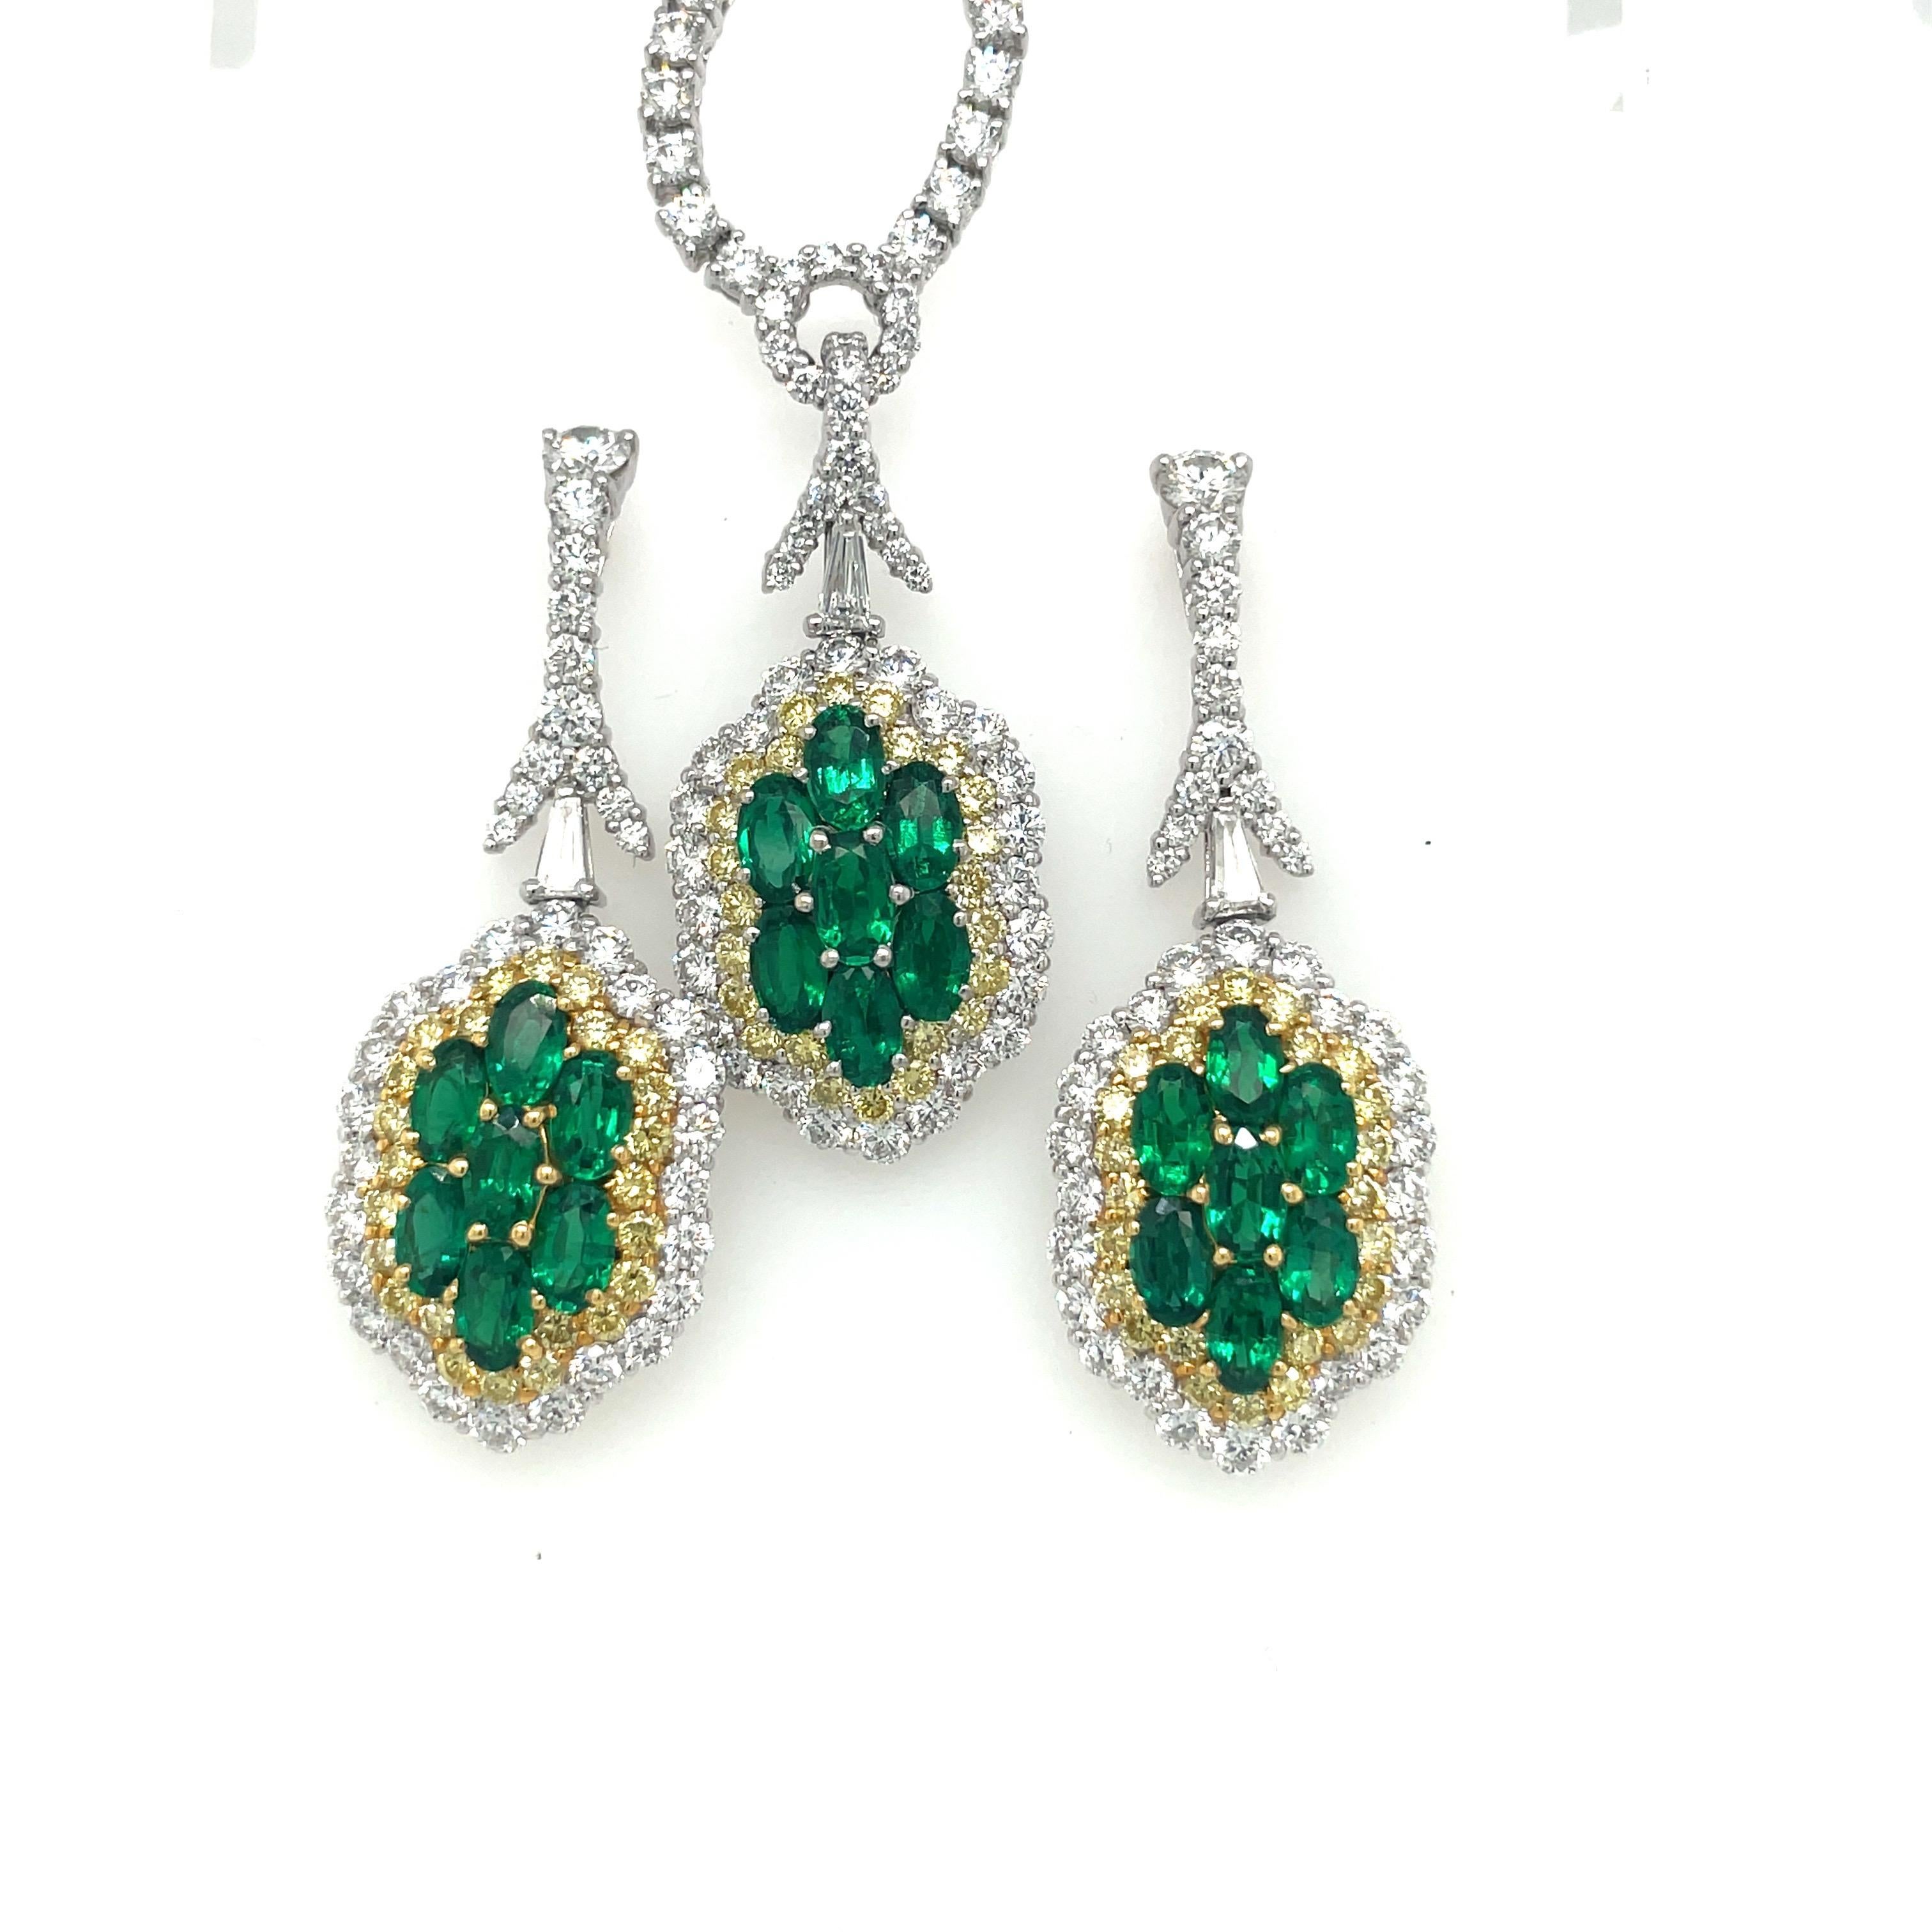 A magnificent diamond pendant necklace. Set in platinum, the necklace is designed with a single row of prong set round brilliant diamonds. A spectacular pendant is set with 7 oval emeralds. Natural yellow and white diamond surround the emeralds in a